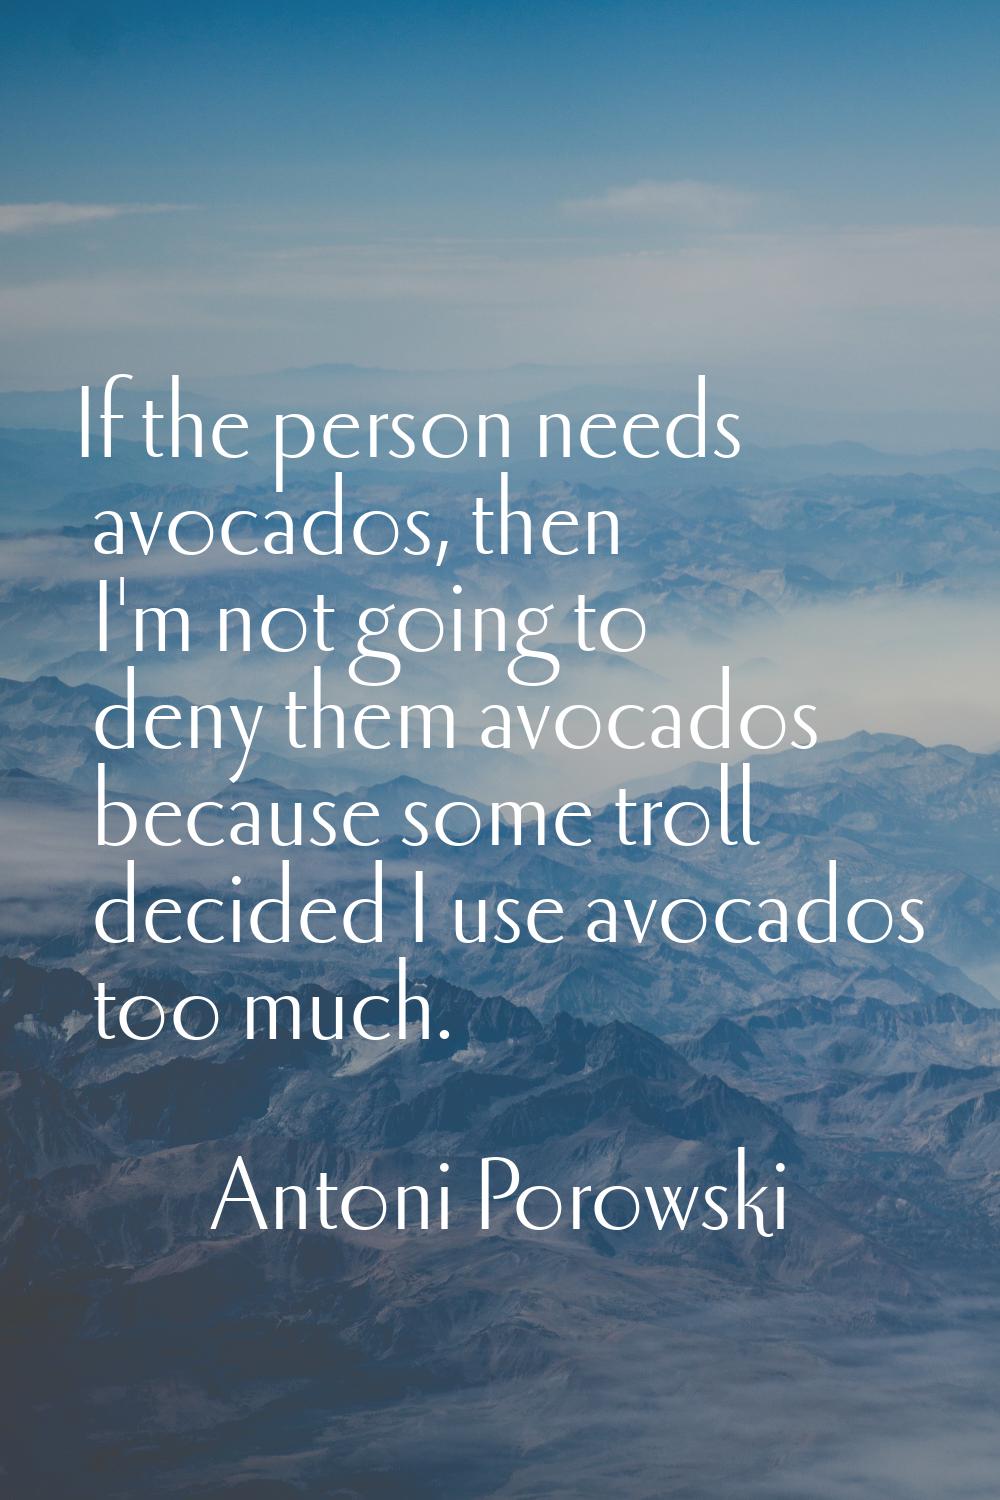 If the person needs avocados, then I'm not going to deny them avocados because some troll decided I